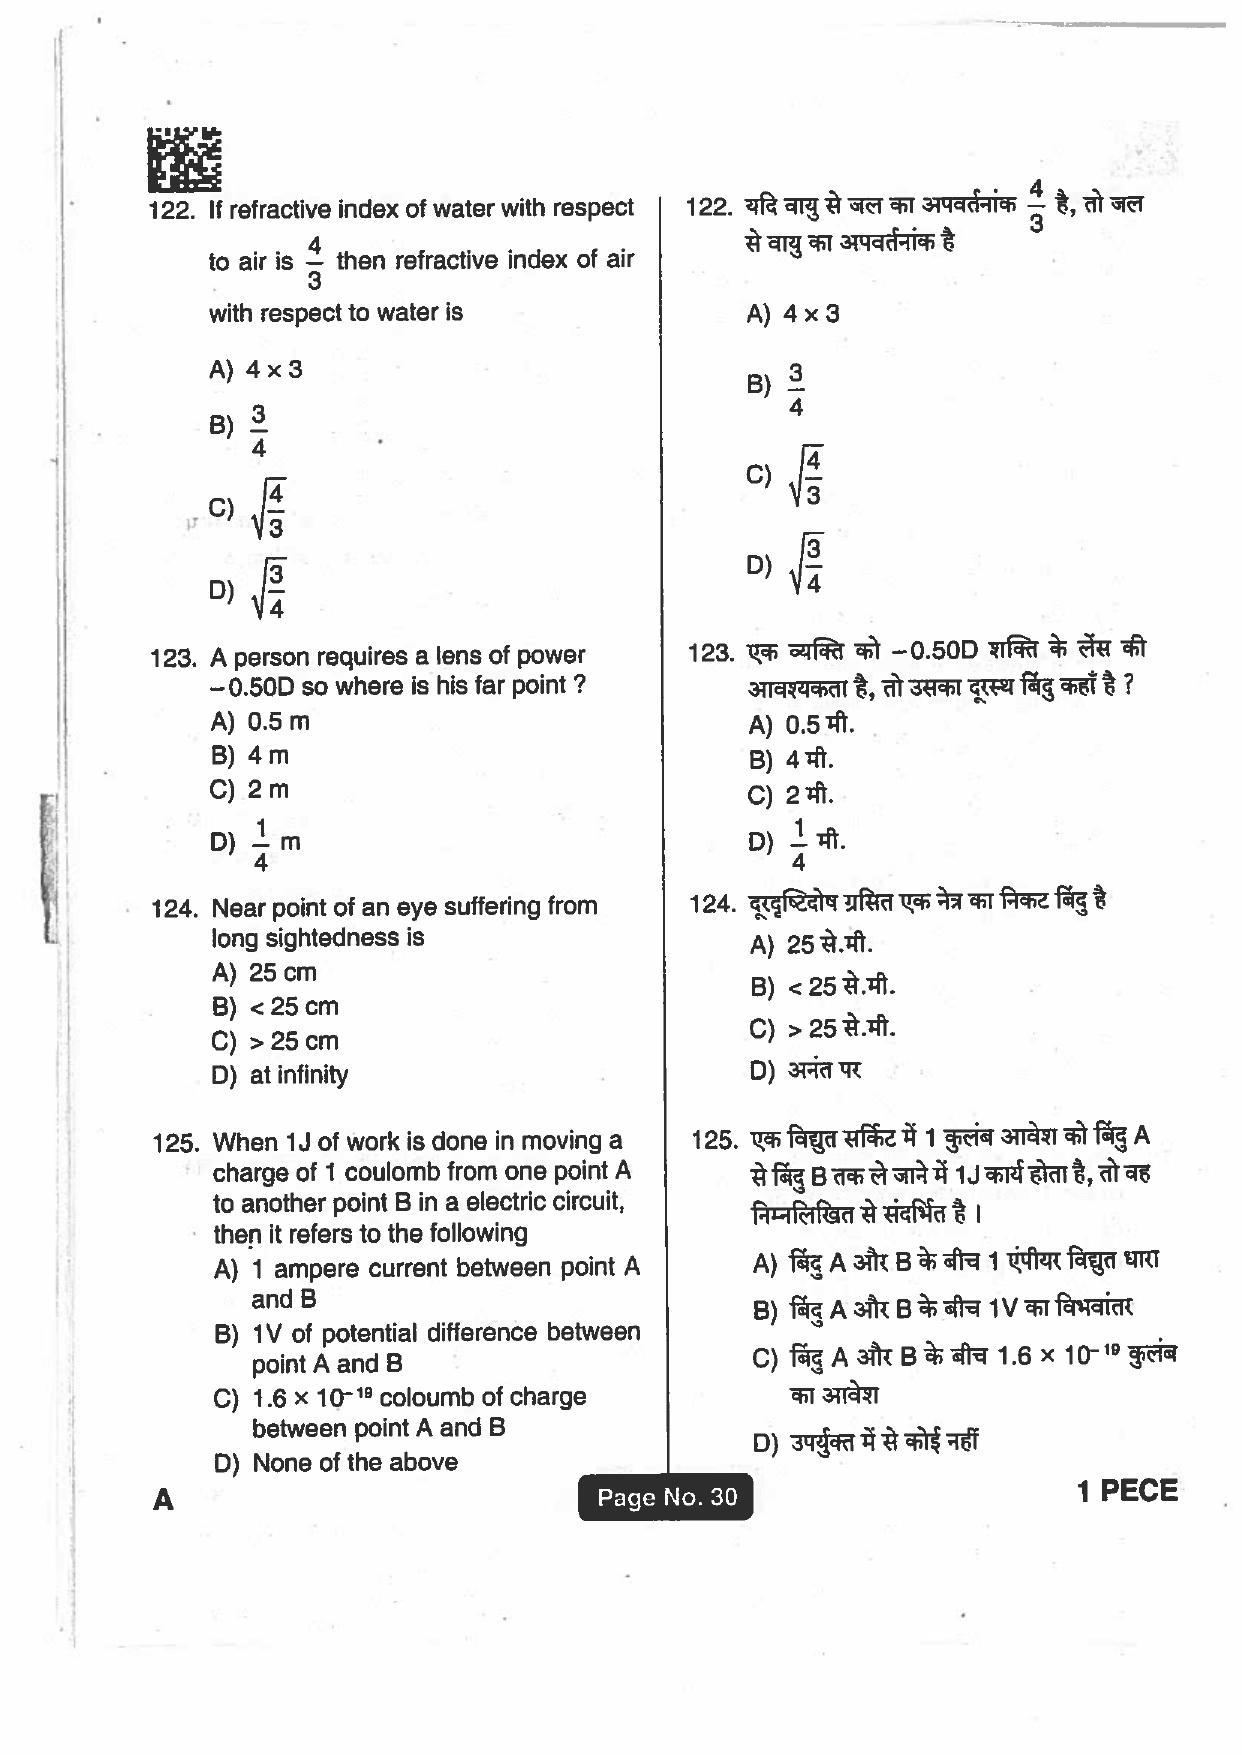 Jharkhand Polytechnic SET A 2018 Question Paper with Answers - Page 29